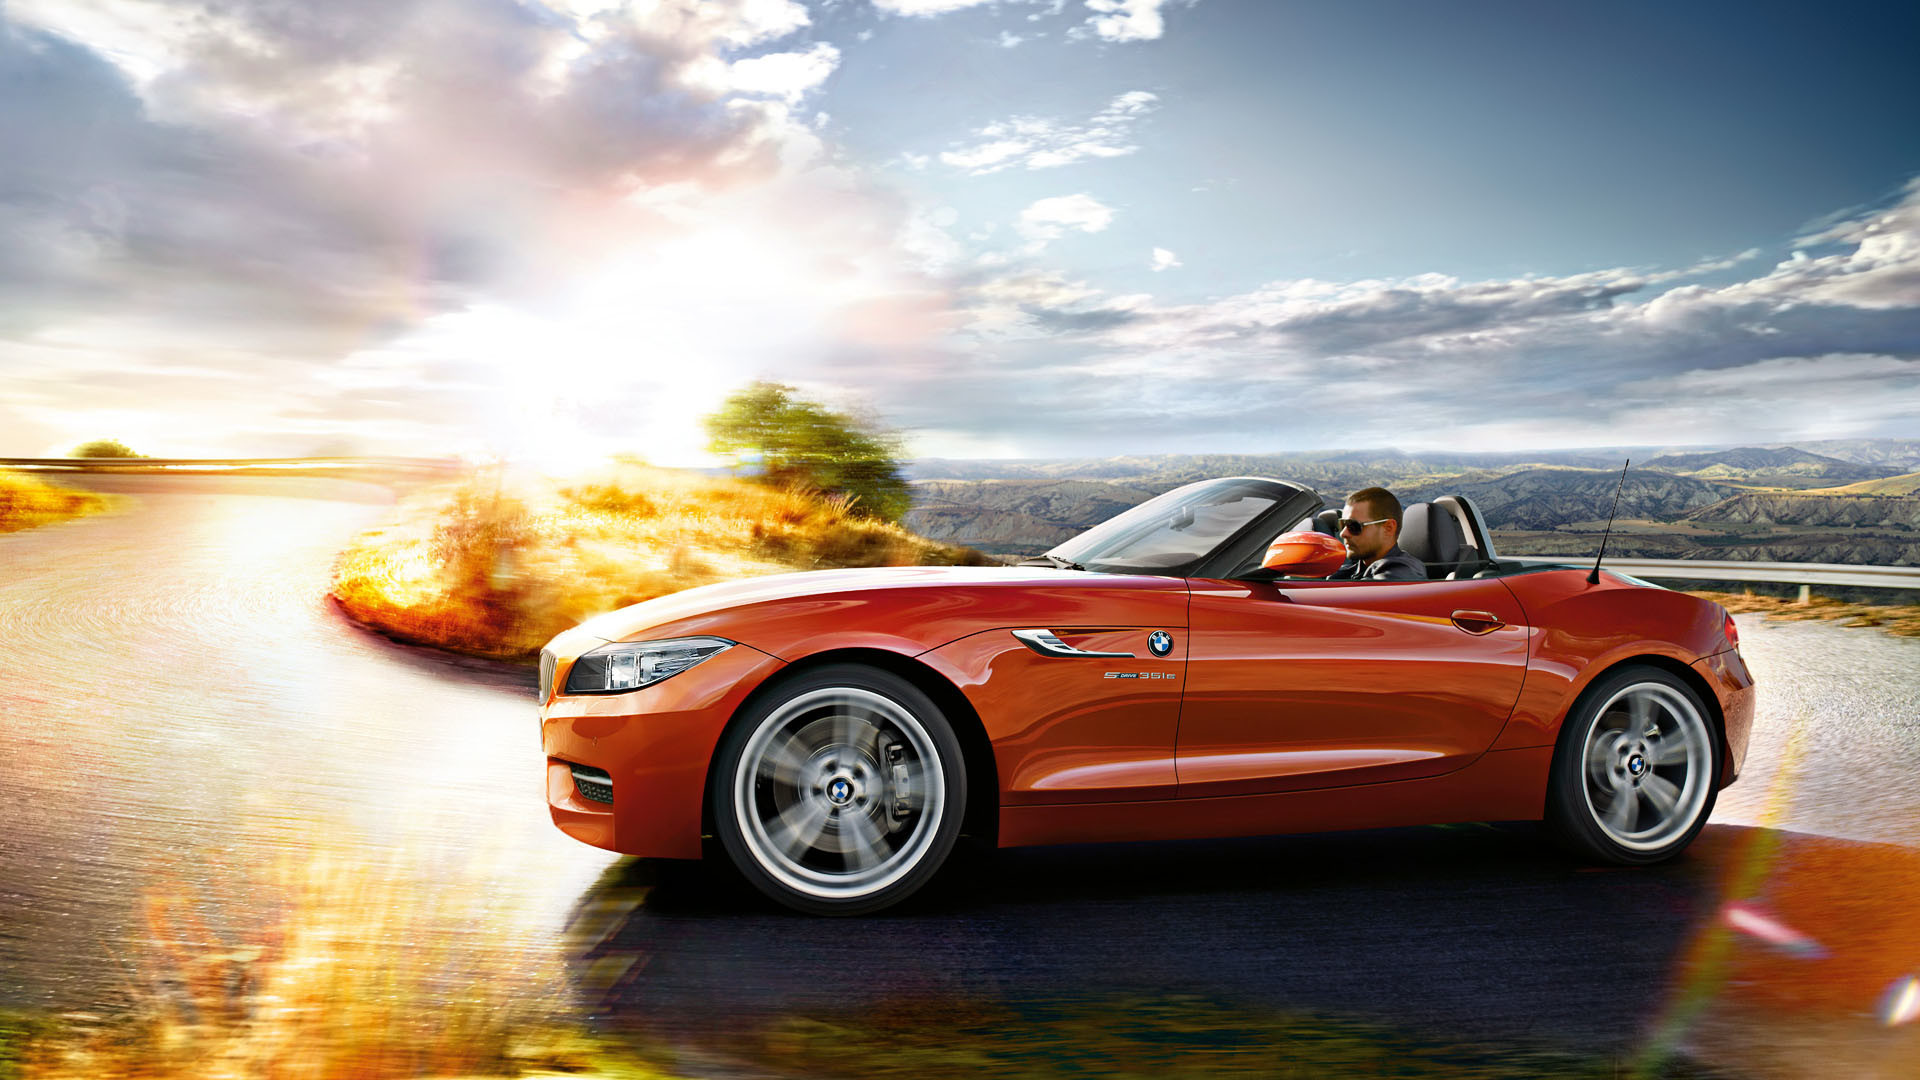 1920x1080 BMW Z4 Wallpaper : HD Wallpapers available in different resolution and  sizes for our computer desktop